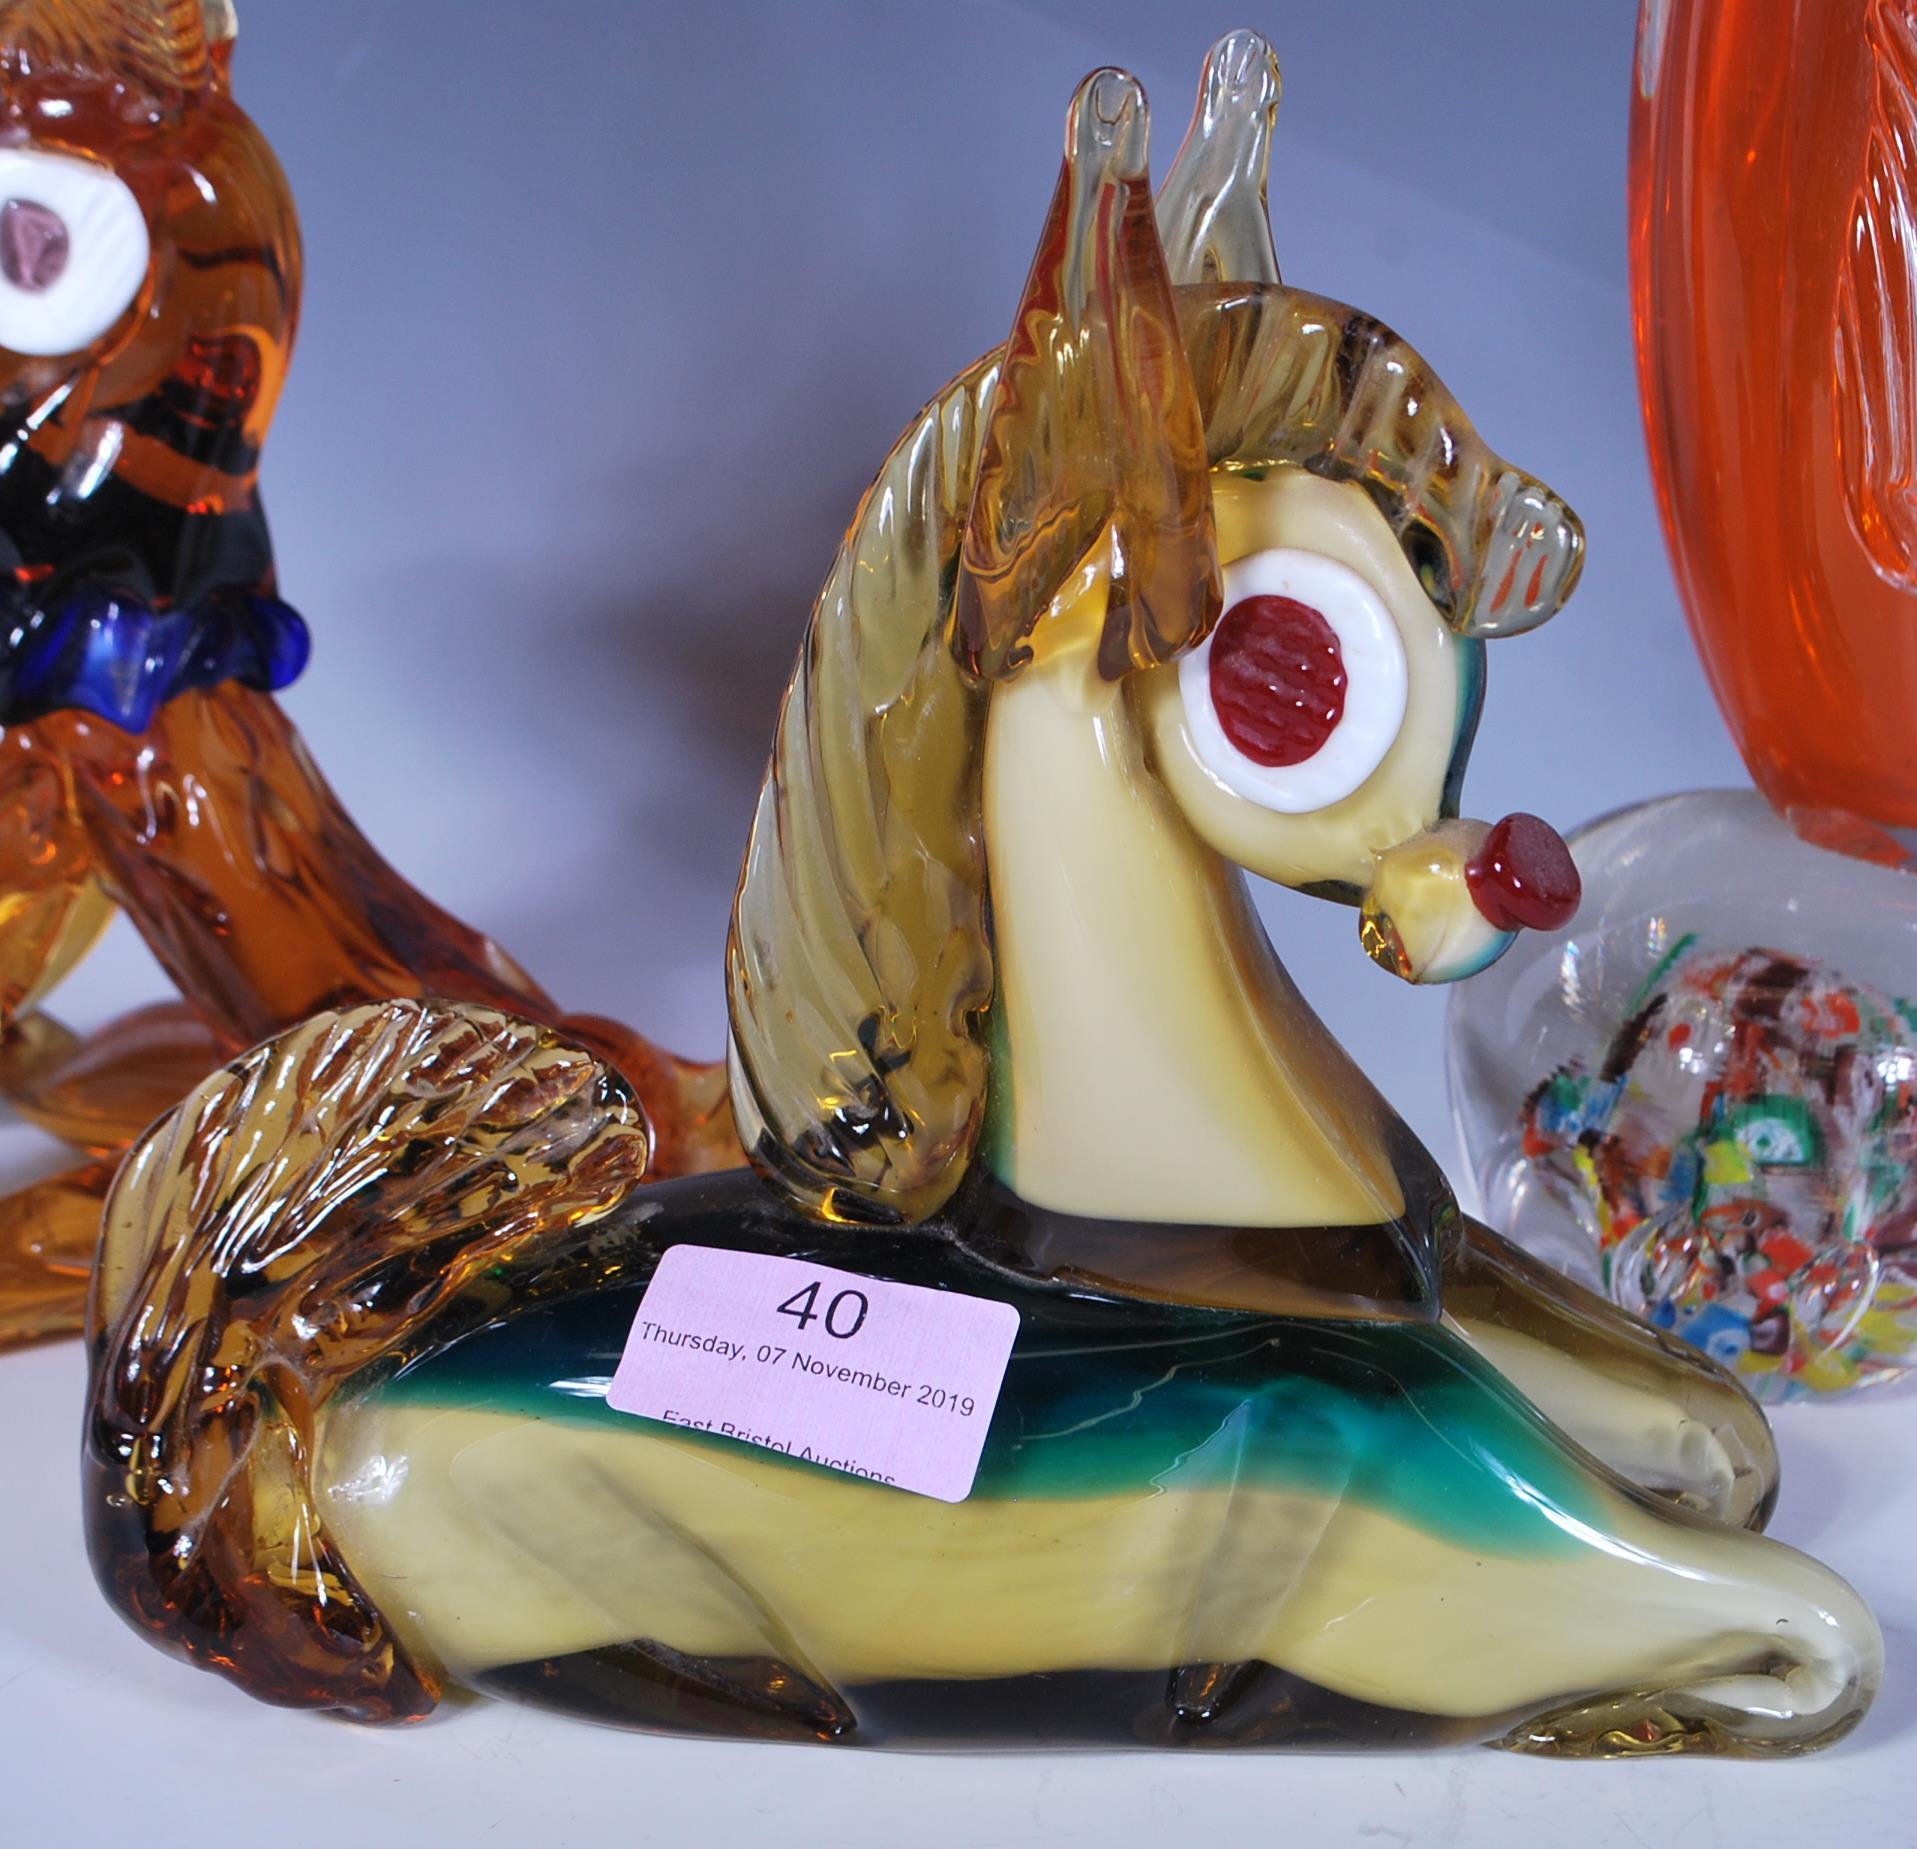 A collection of vintage retro 20th Century studio glass figurines by Murano modelled as animals to - Image 4 of 7